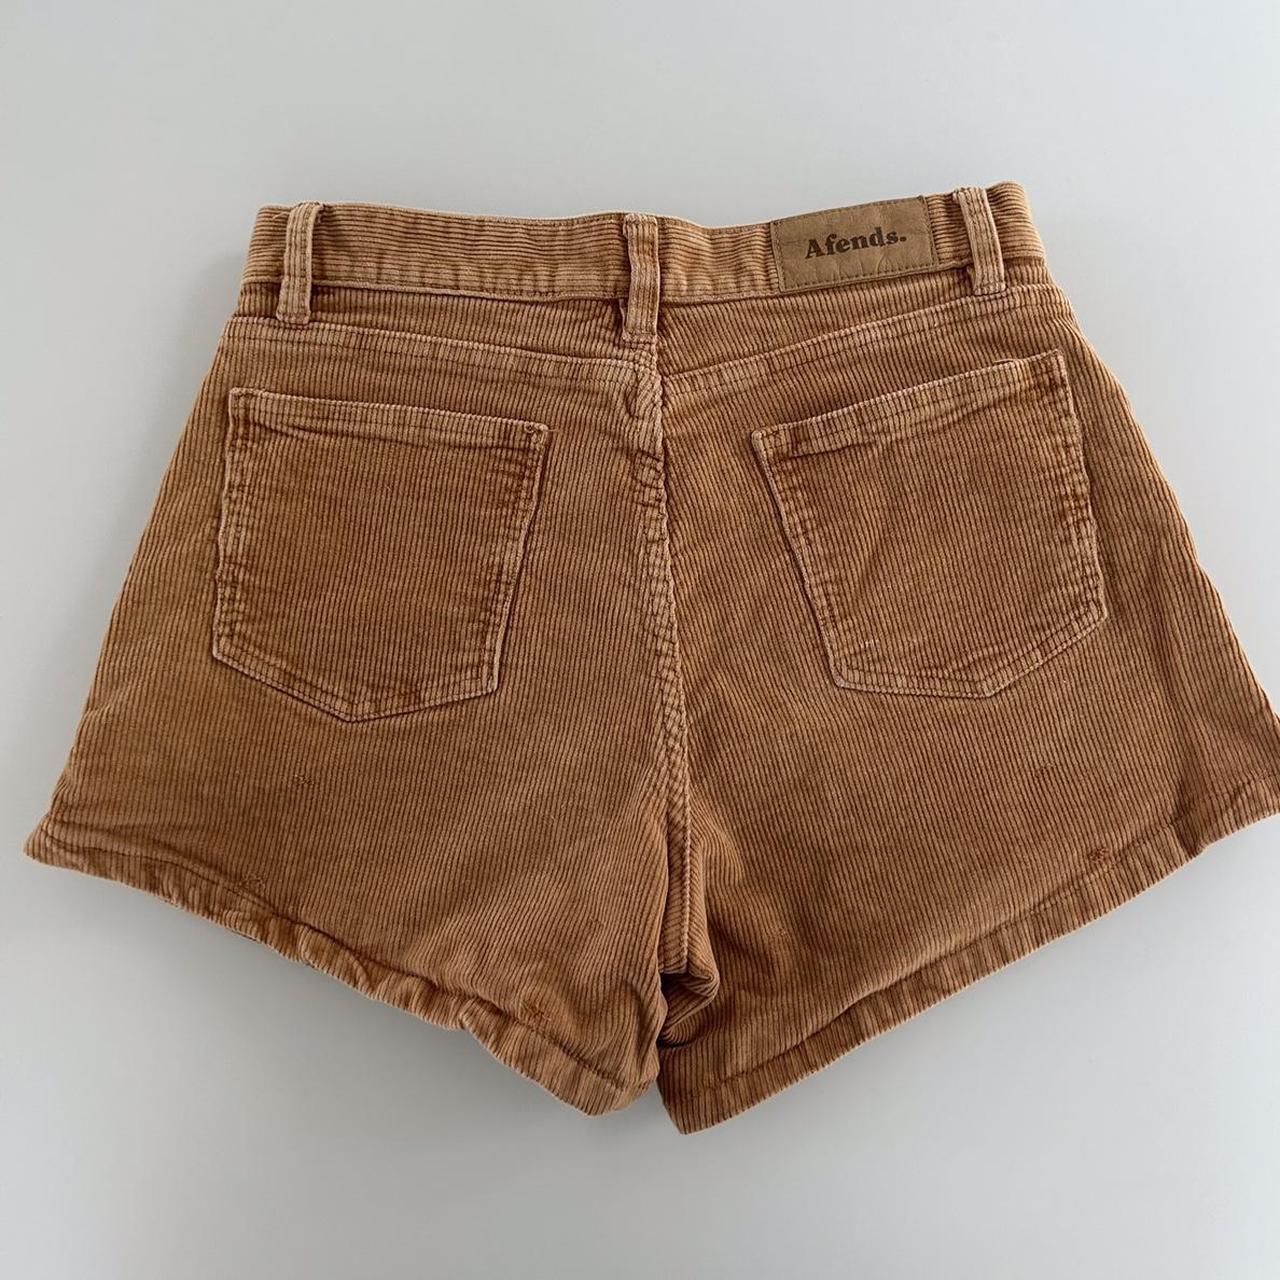 Afends Women's Orange and Tan Shorts